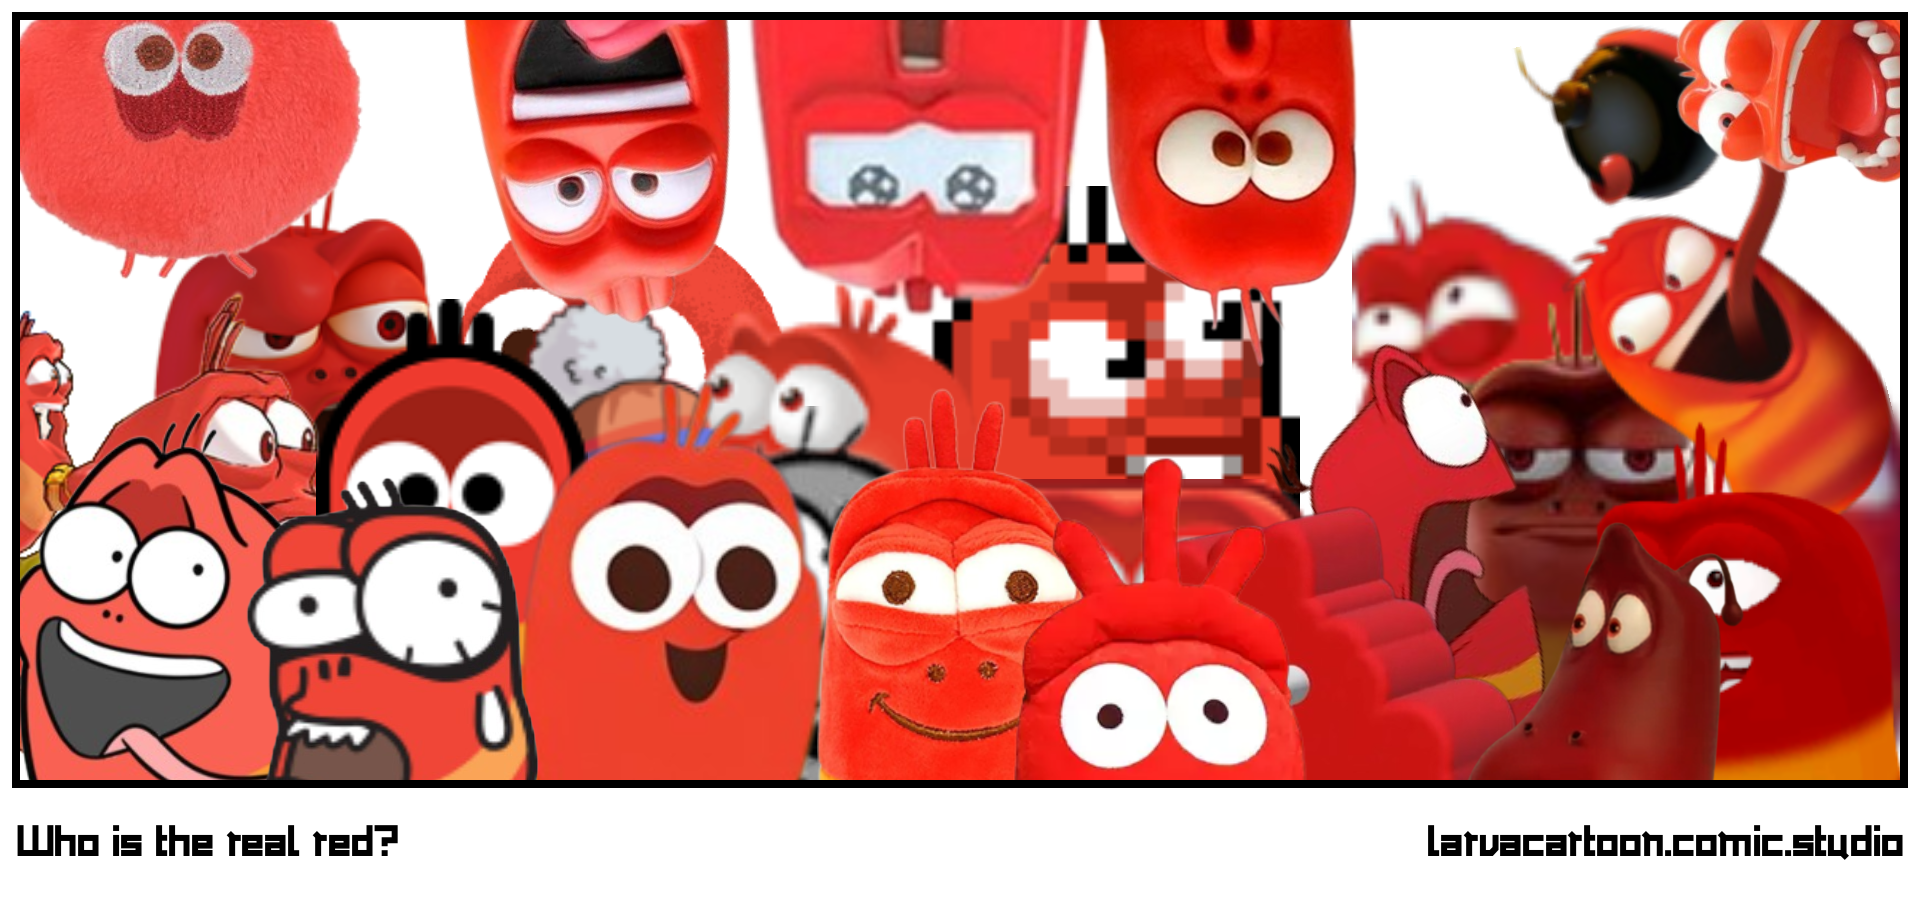 Who is the real red?